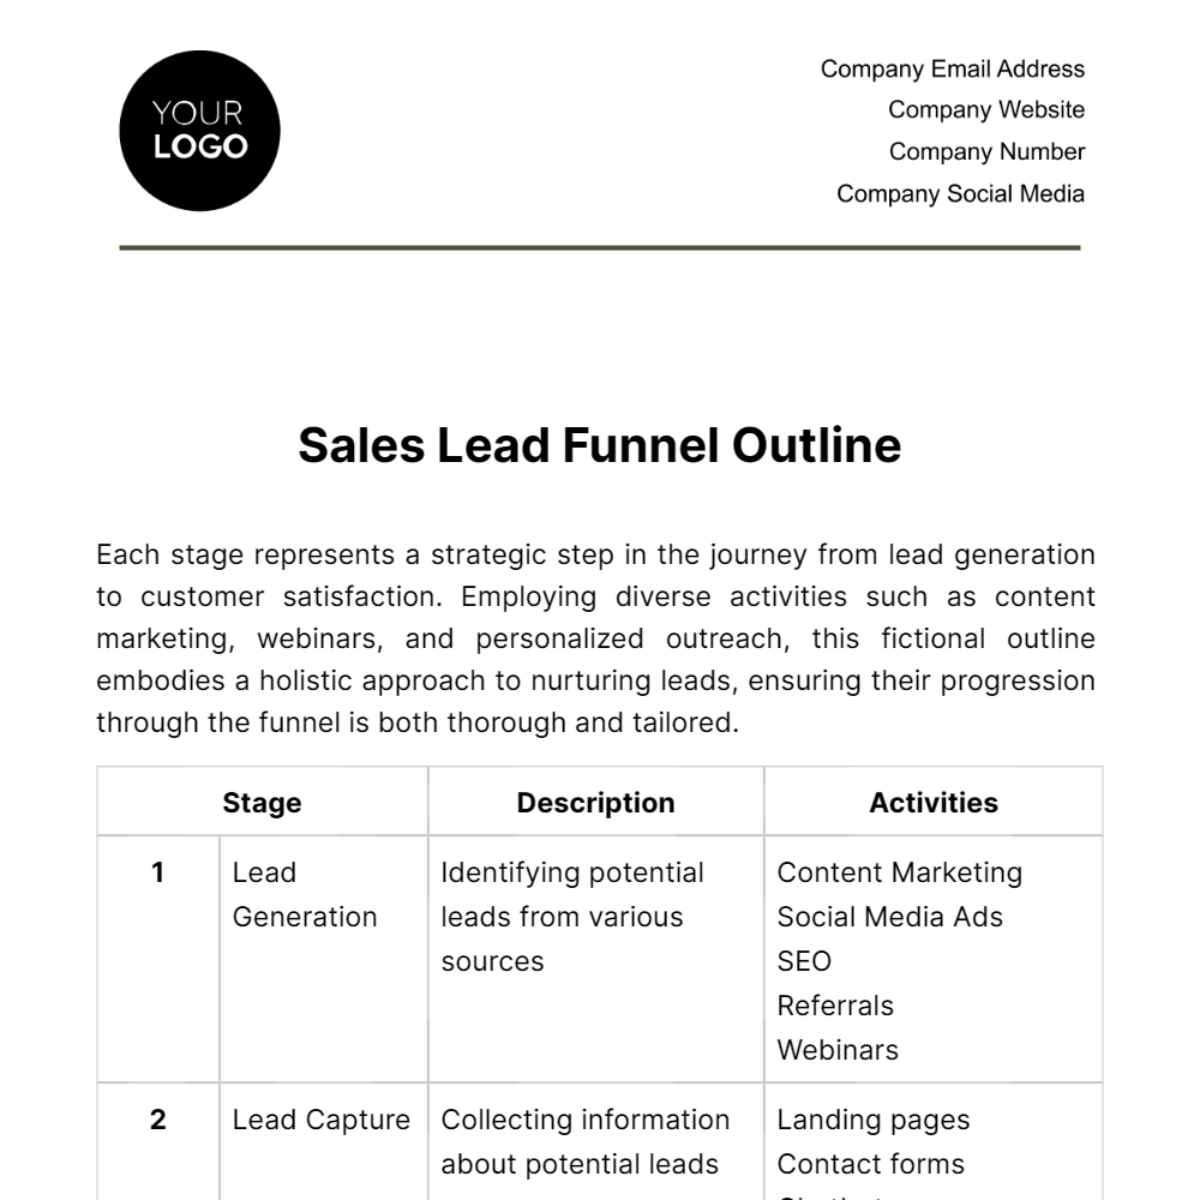 Sales Lead Funnel Outline Template